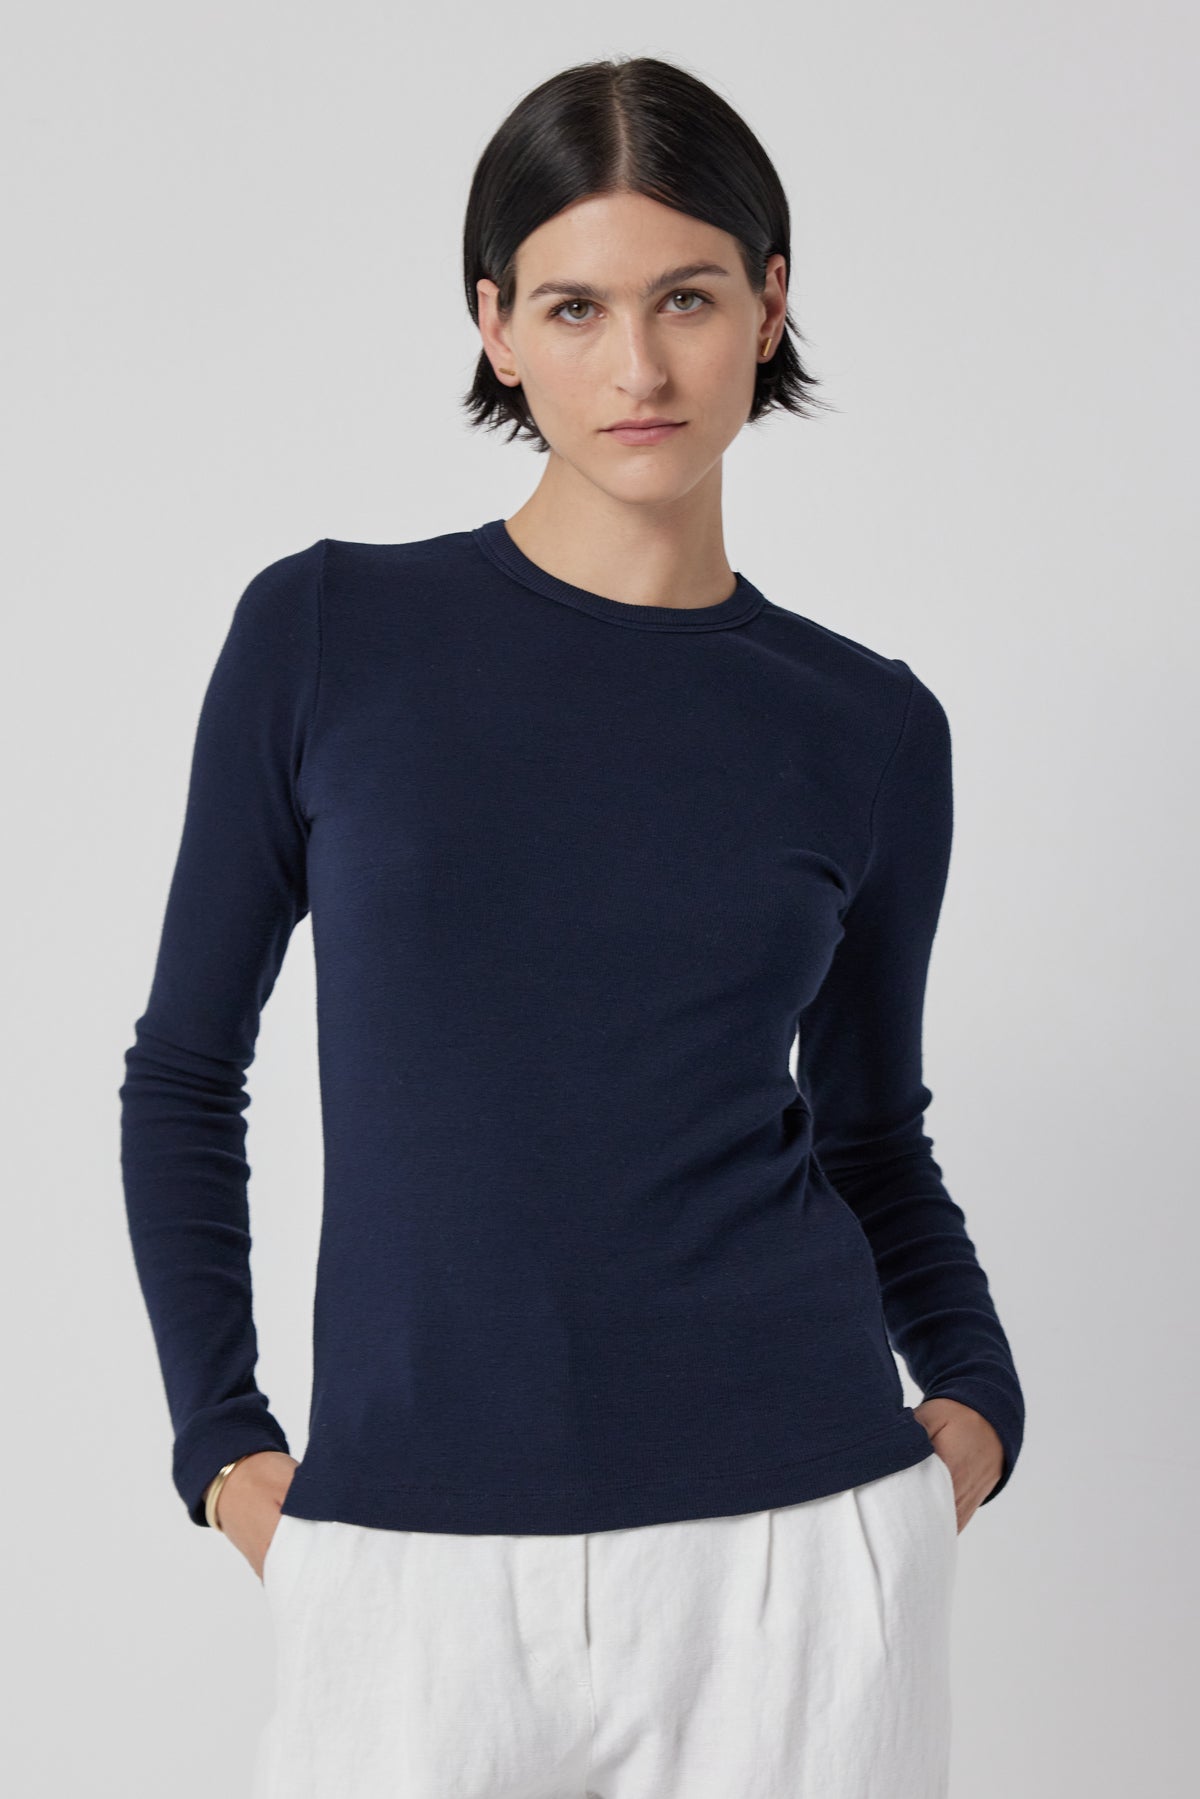 Woman wearing a slimmer fit navy blue long-sleeve CAMINO TEE by Velvet by Jenny Graham and white pants.-36463421980865